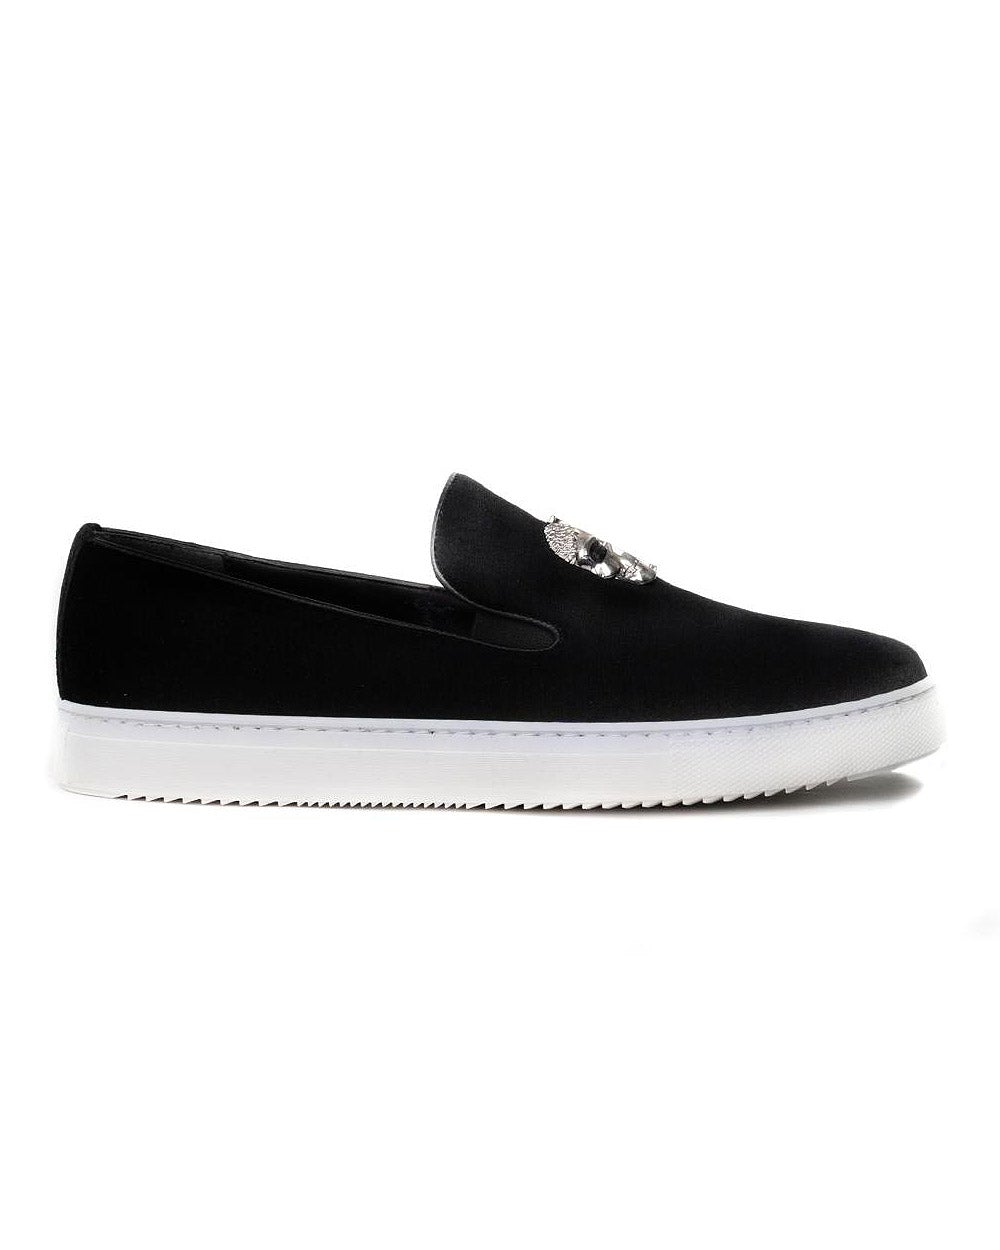 Black loafer shoes suede leather look with metal skull and sneaker type sole for men